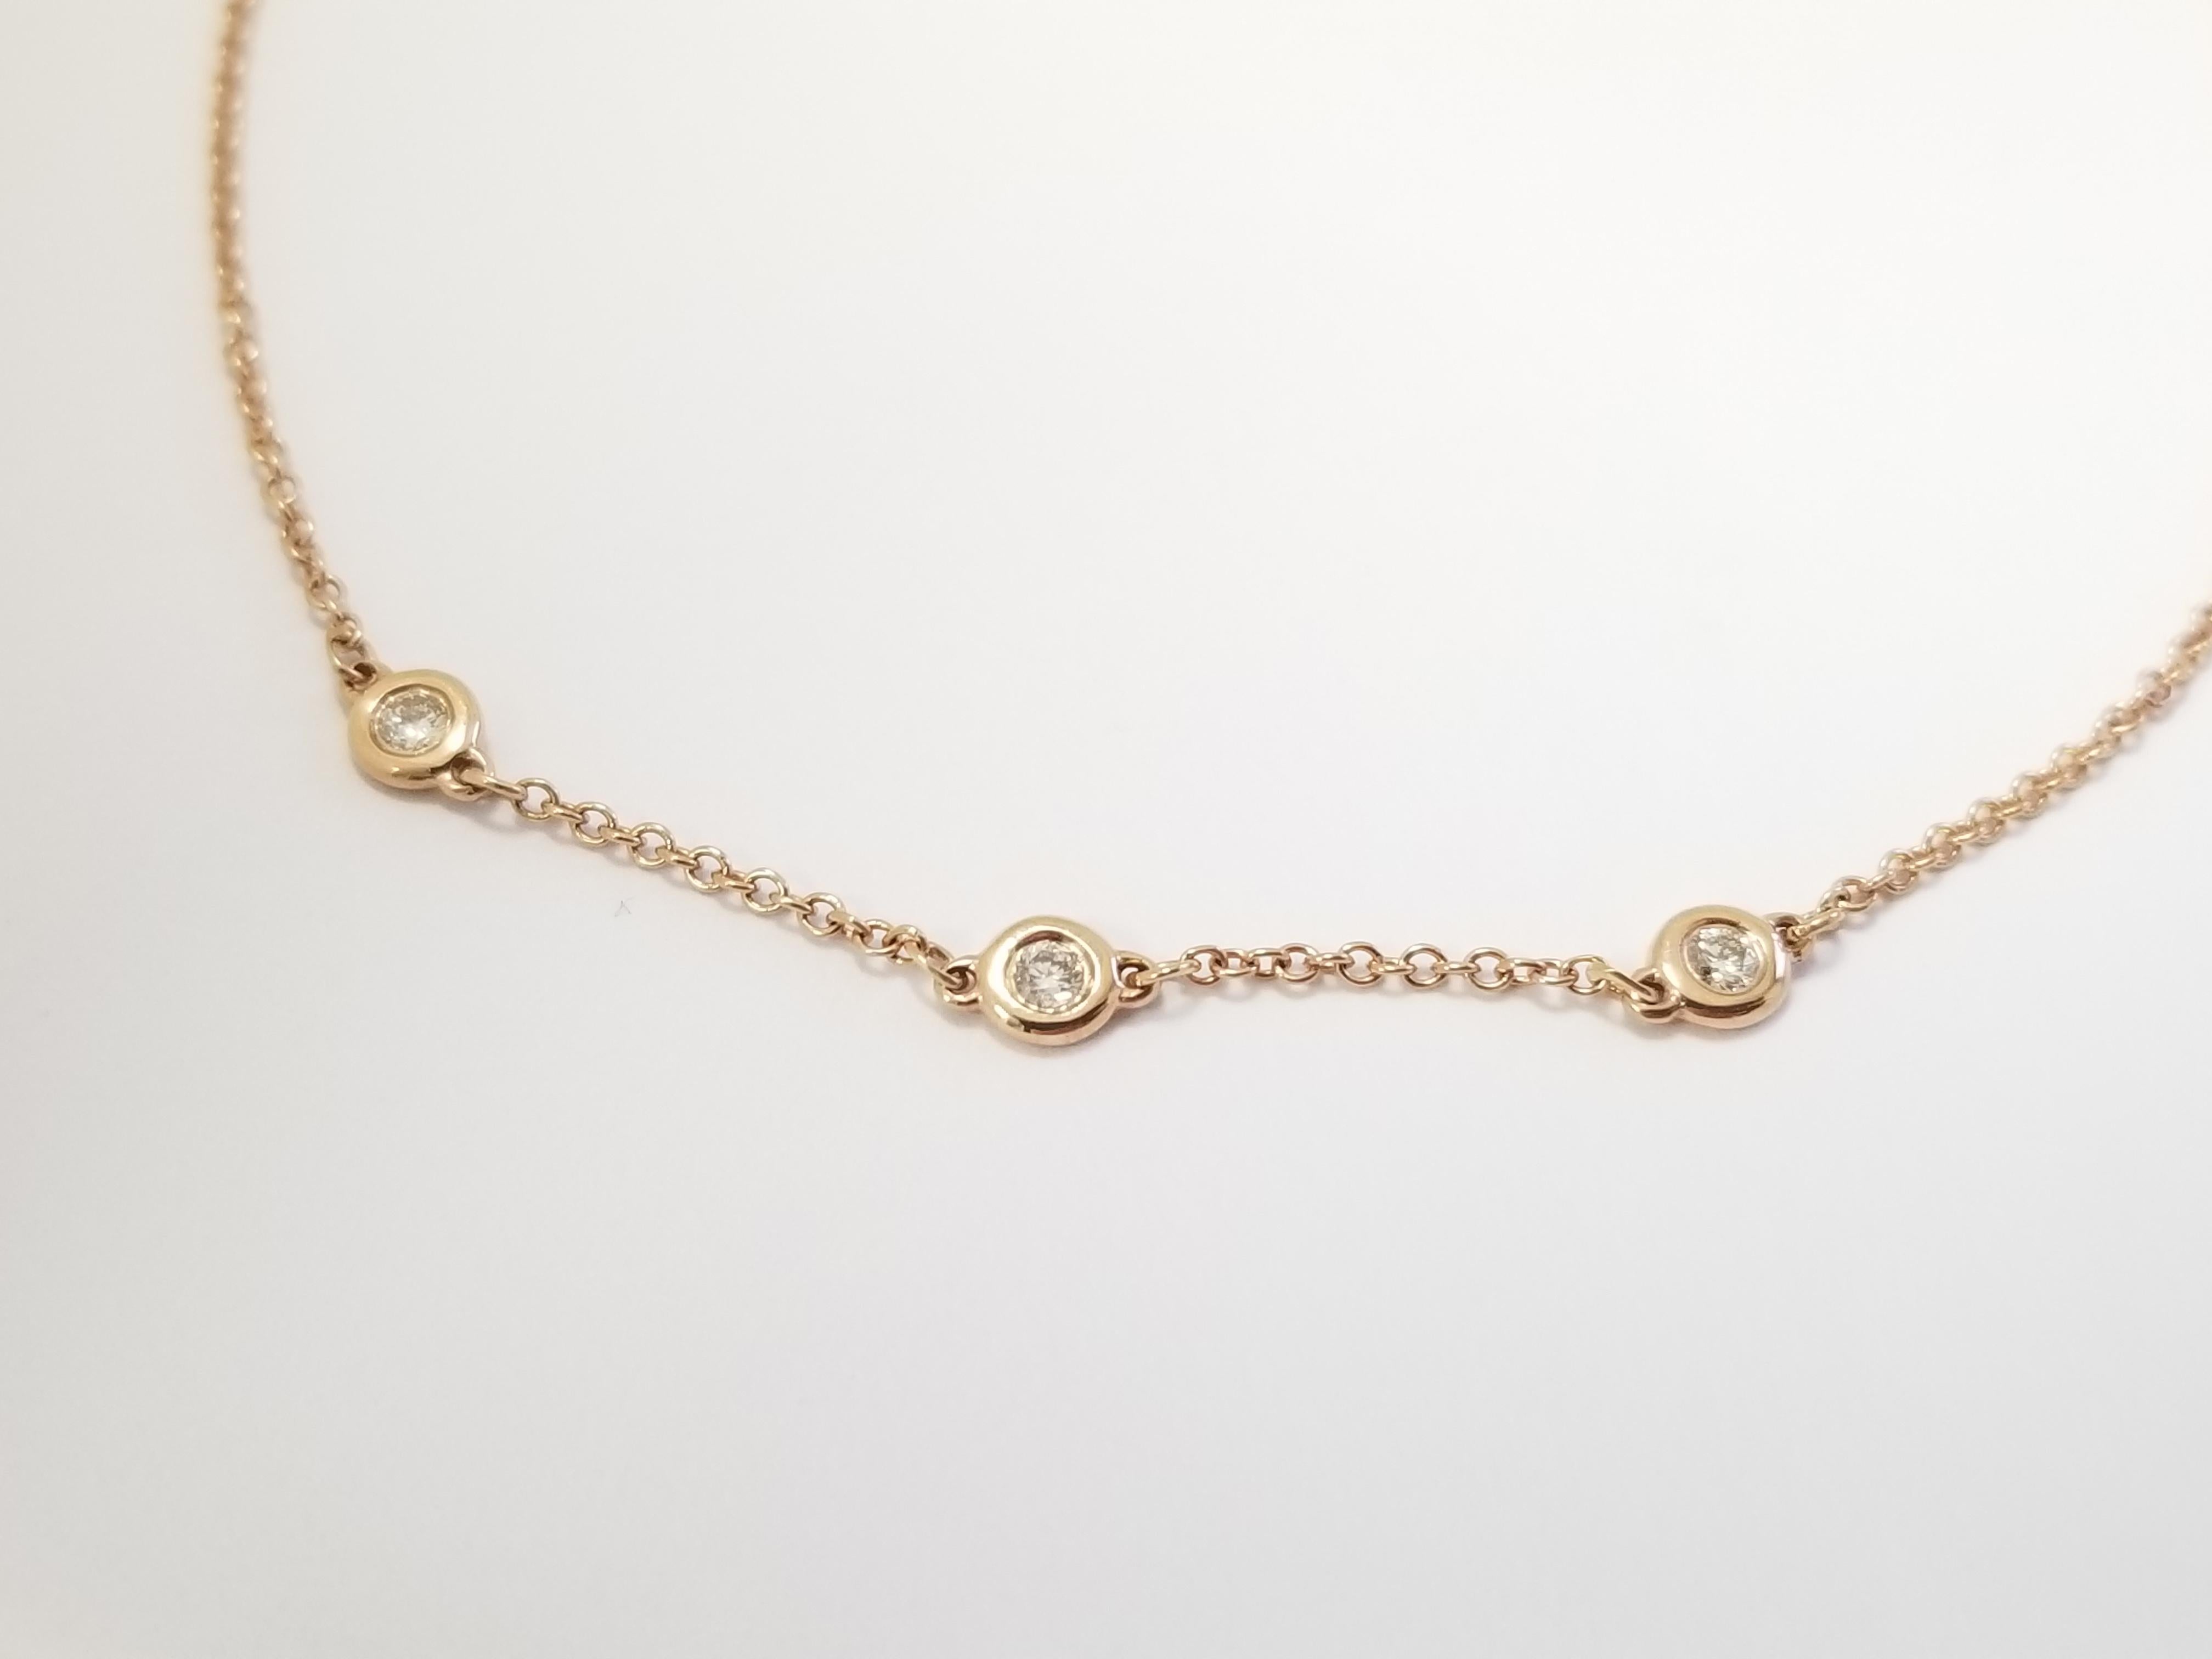 Beautiful Collection 3 Stations Diamond By The Yard Bracelet 14k Rose Gold 0.12 ctw. 8 Inch. with lobster clasp.